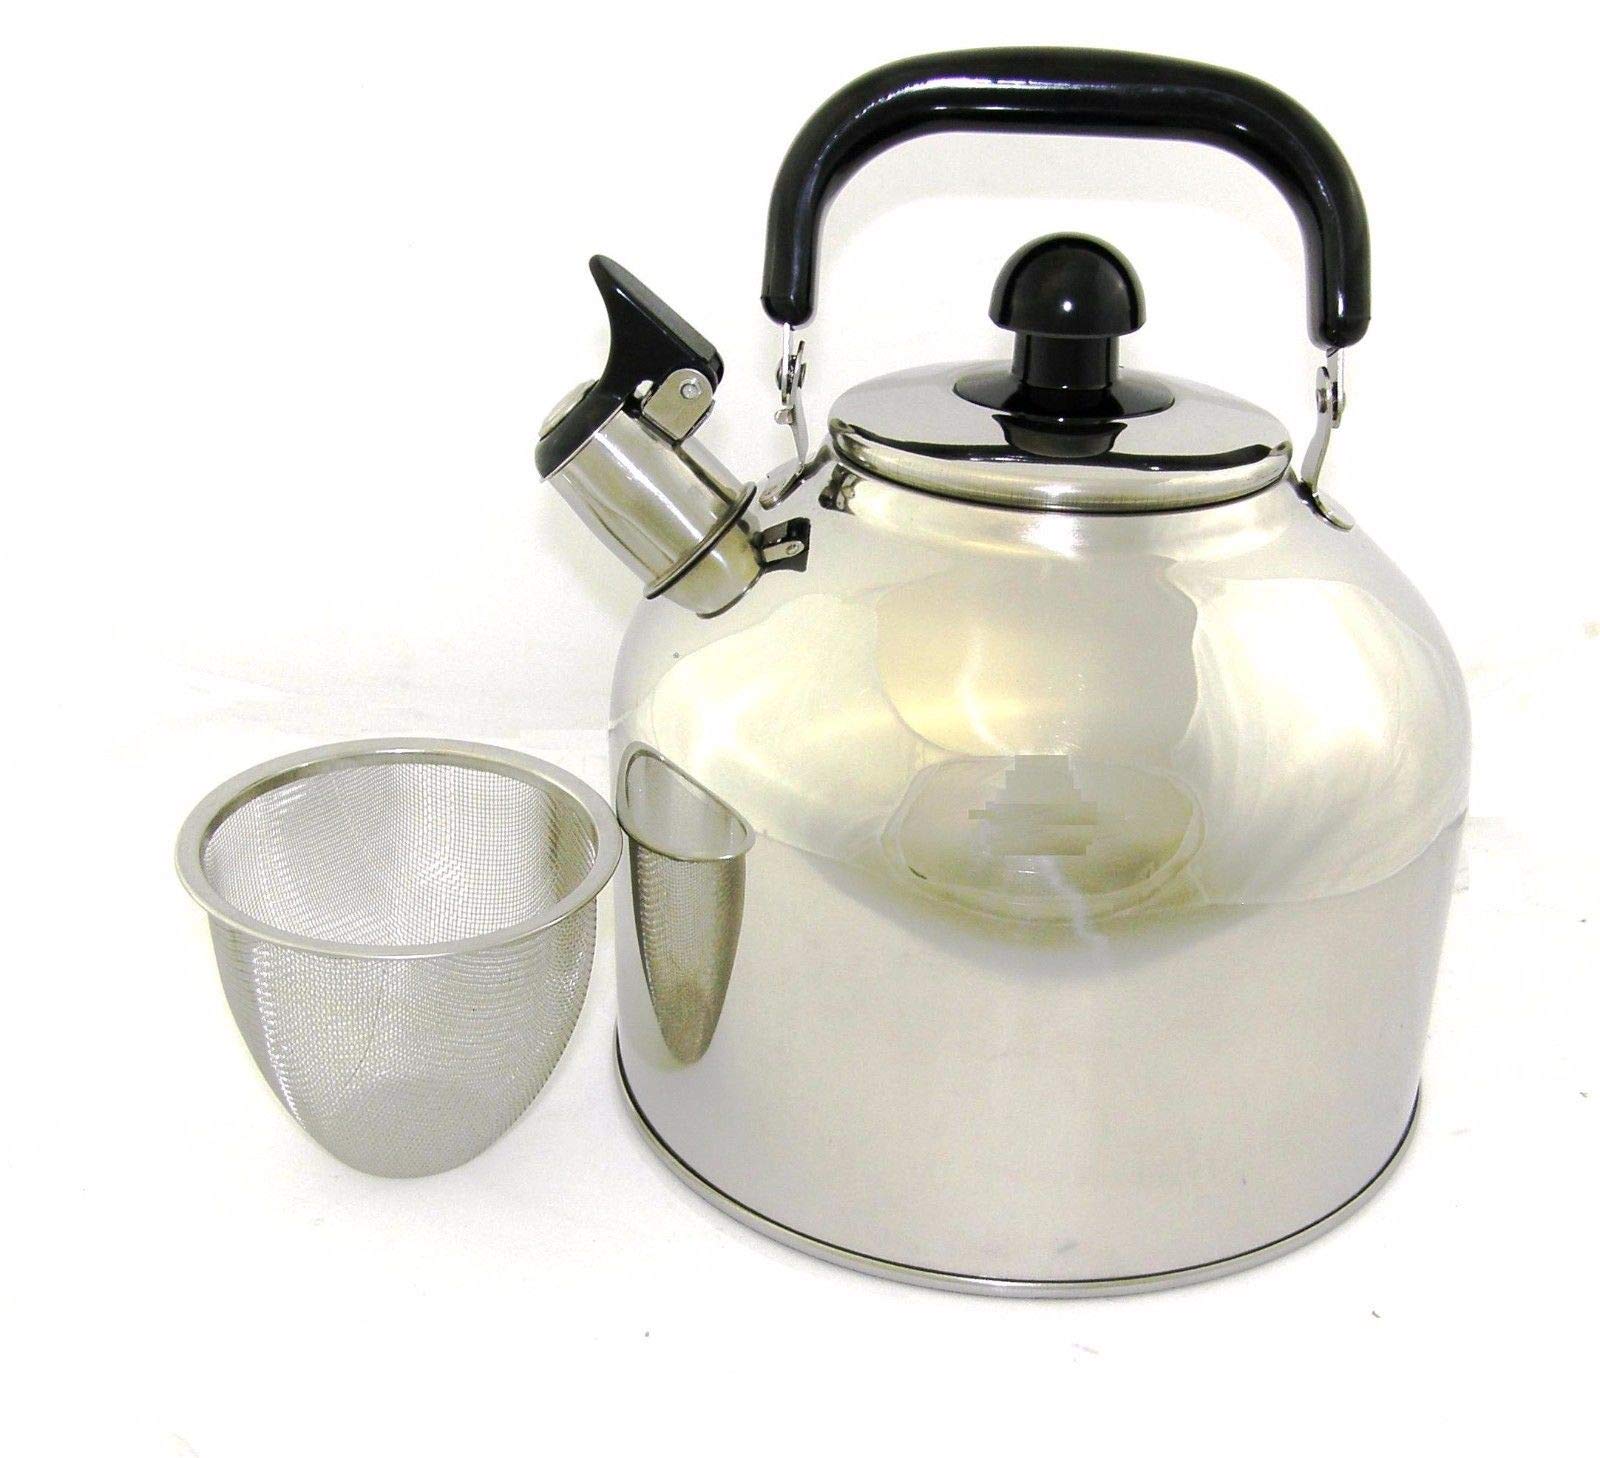 Stainless Steel Whistling Tea Kettle Large 7 Quart Teapot with Mesh Infuser 6.3 Liter Hot Water Pot Removable Lid Covered Handle Big Teapot For Mak...